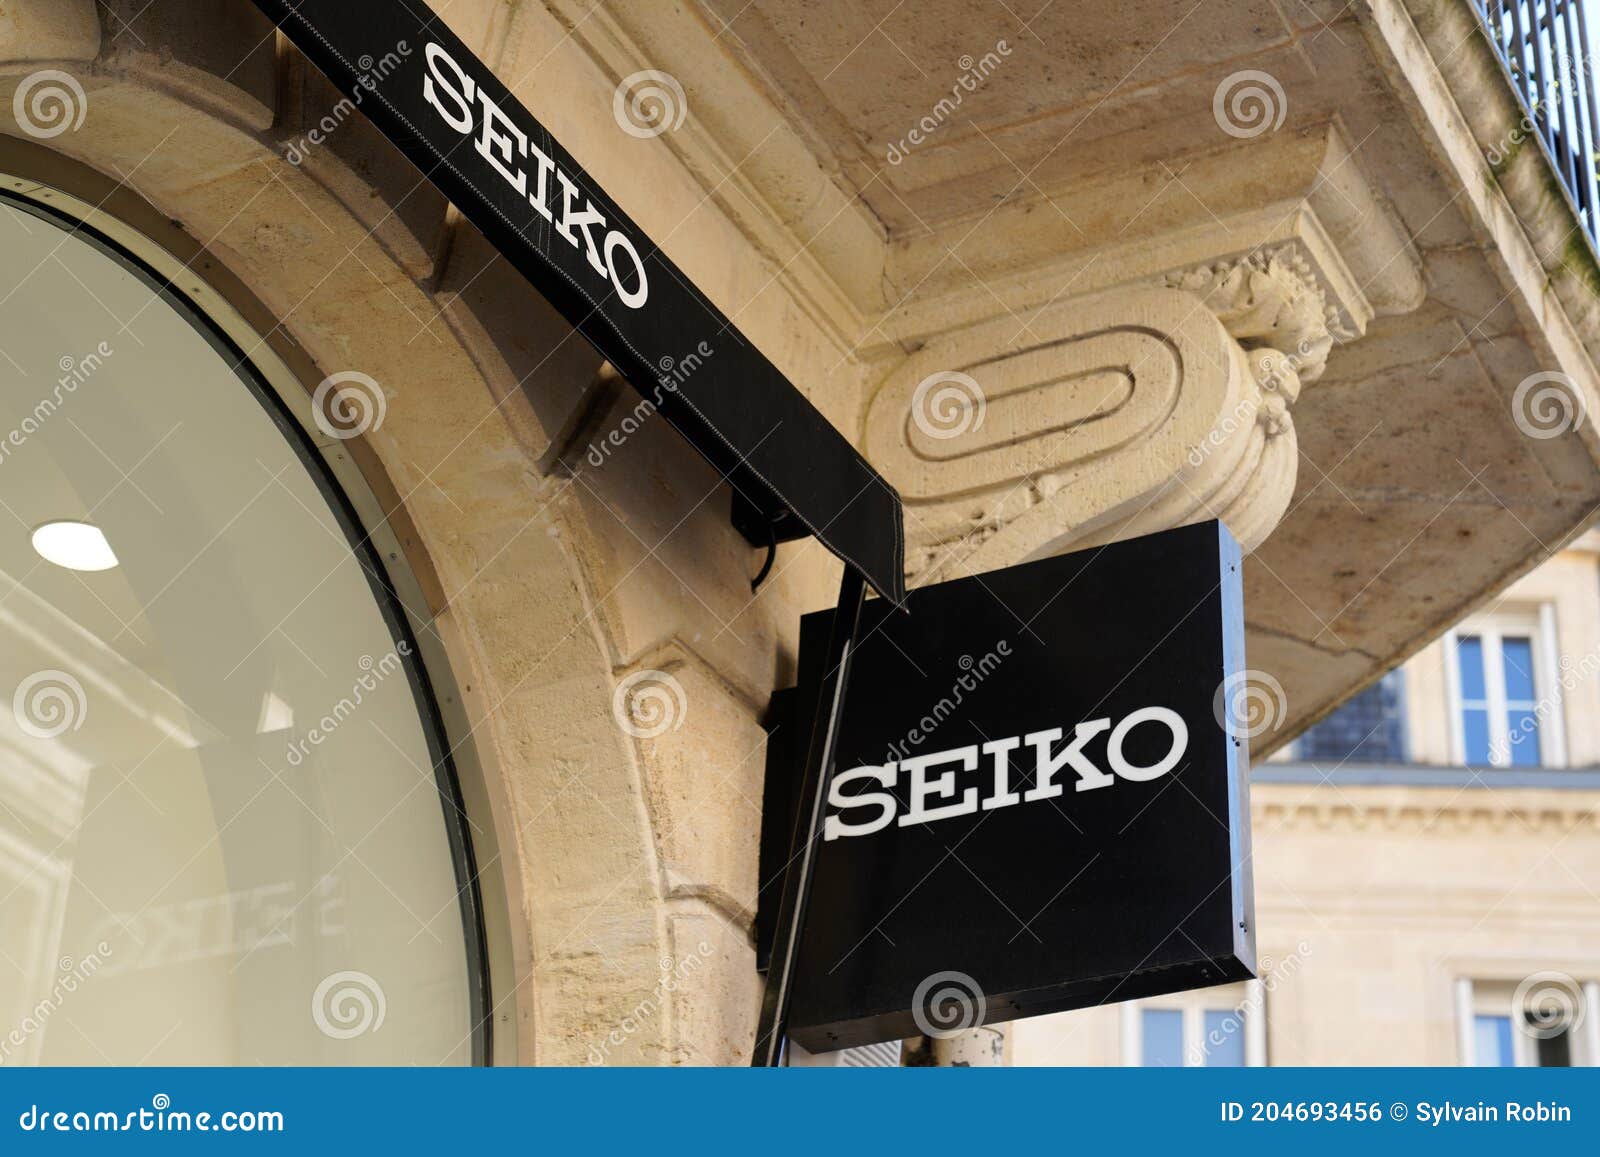 Seiko Boutique Logo and Sign Text Front of Store Fashion Brand Clock  Watches Shop in Editorial Photo - Image of front, icon: 204693456